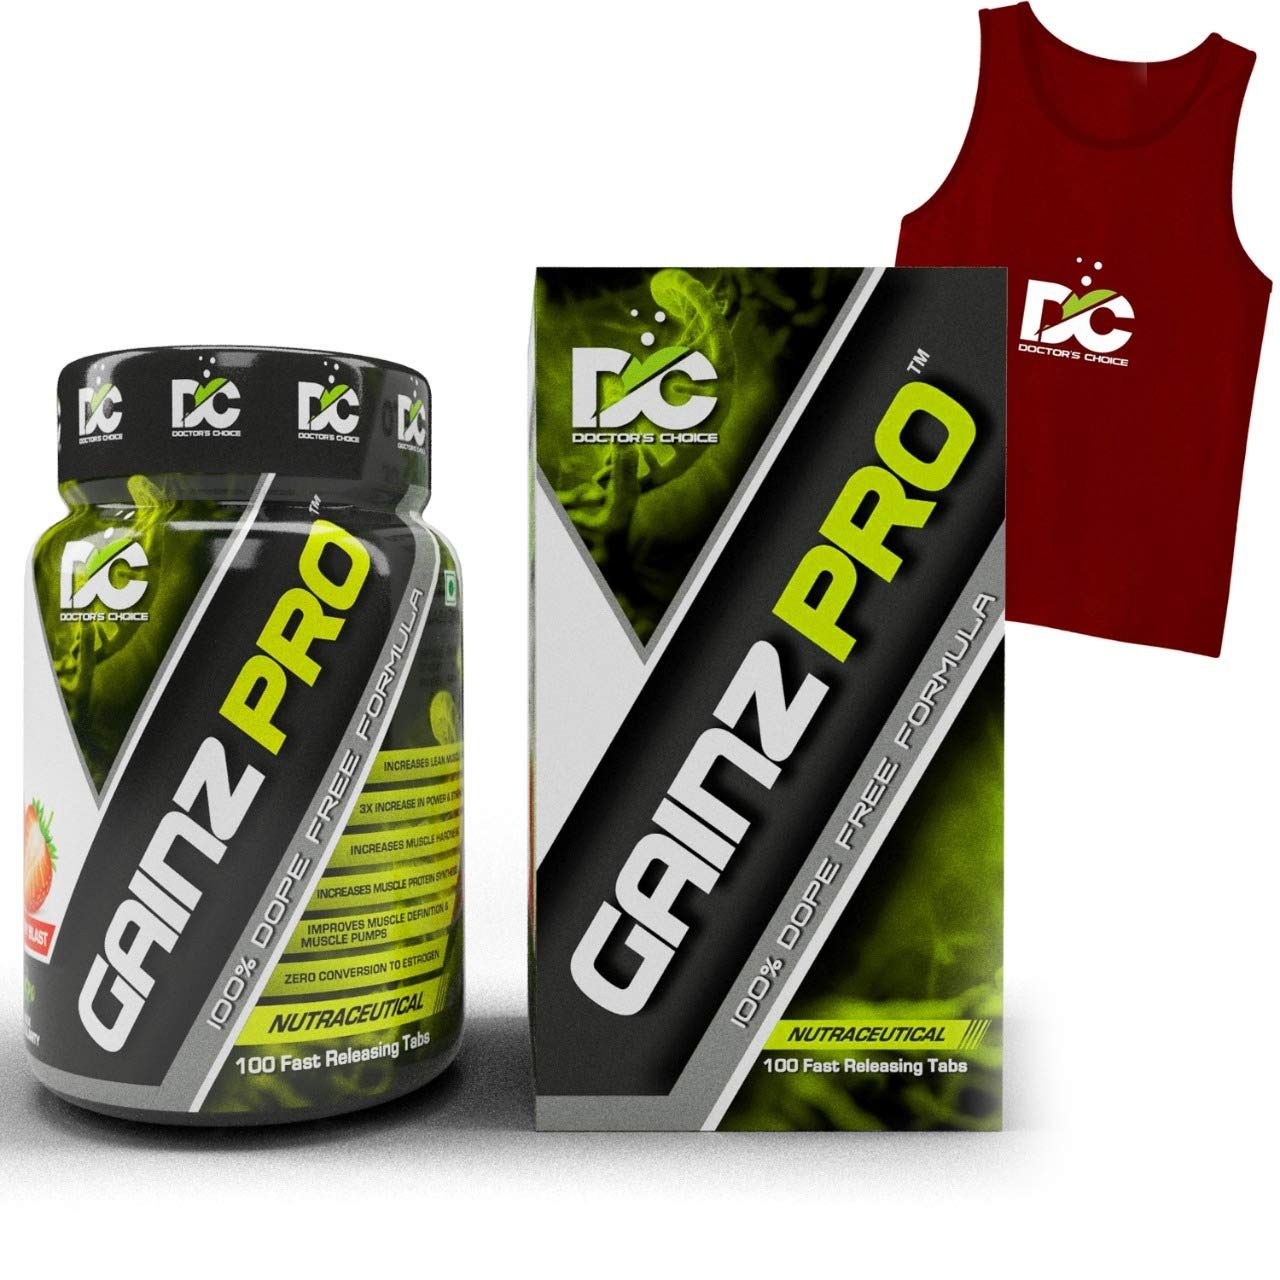 Doctors Choice Grainz Pro For Increased Muscle Mass & Endurance Image